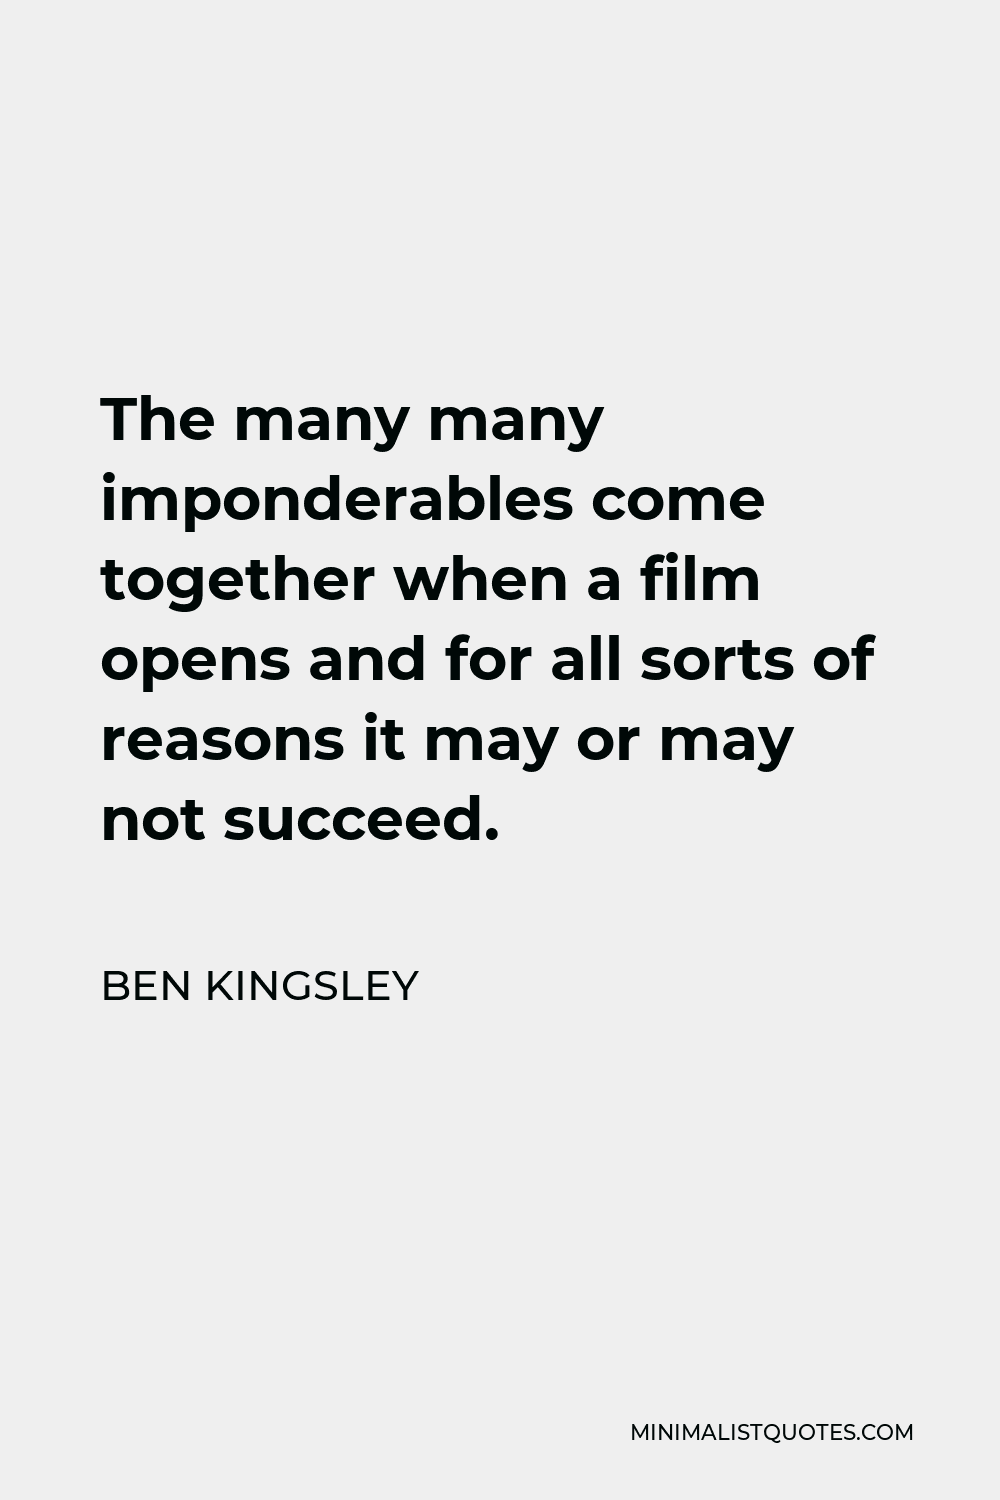 Ben Kingsley Quote - The many many imponderables come together when a film opens and for all sorts of reasons it may or may not succeed.